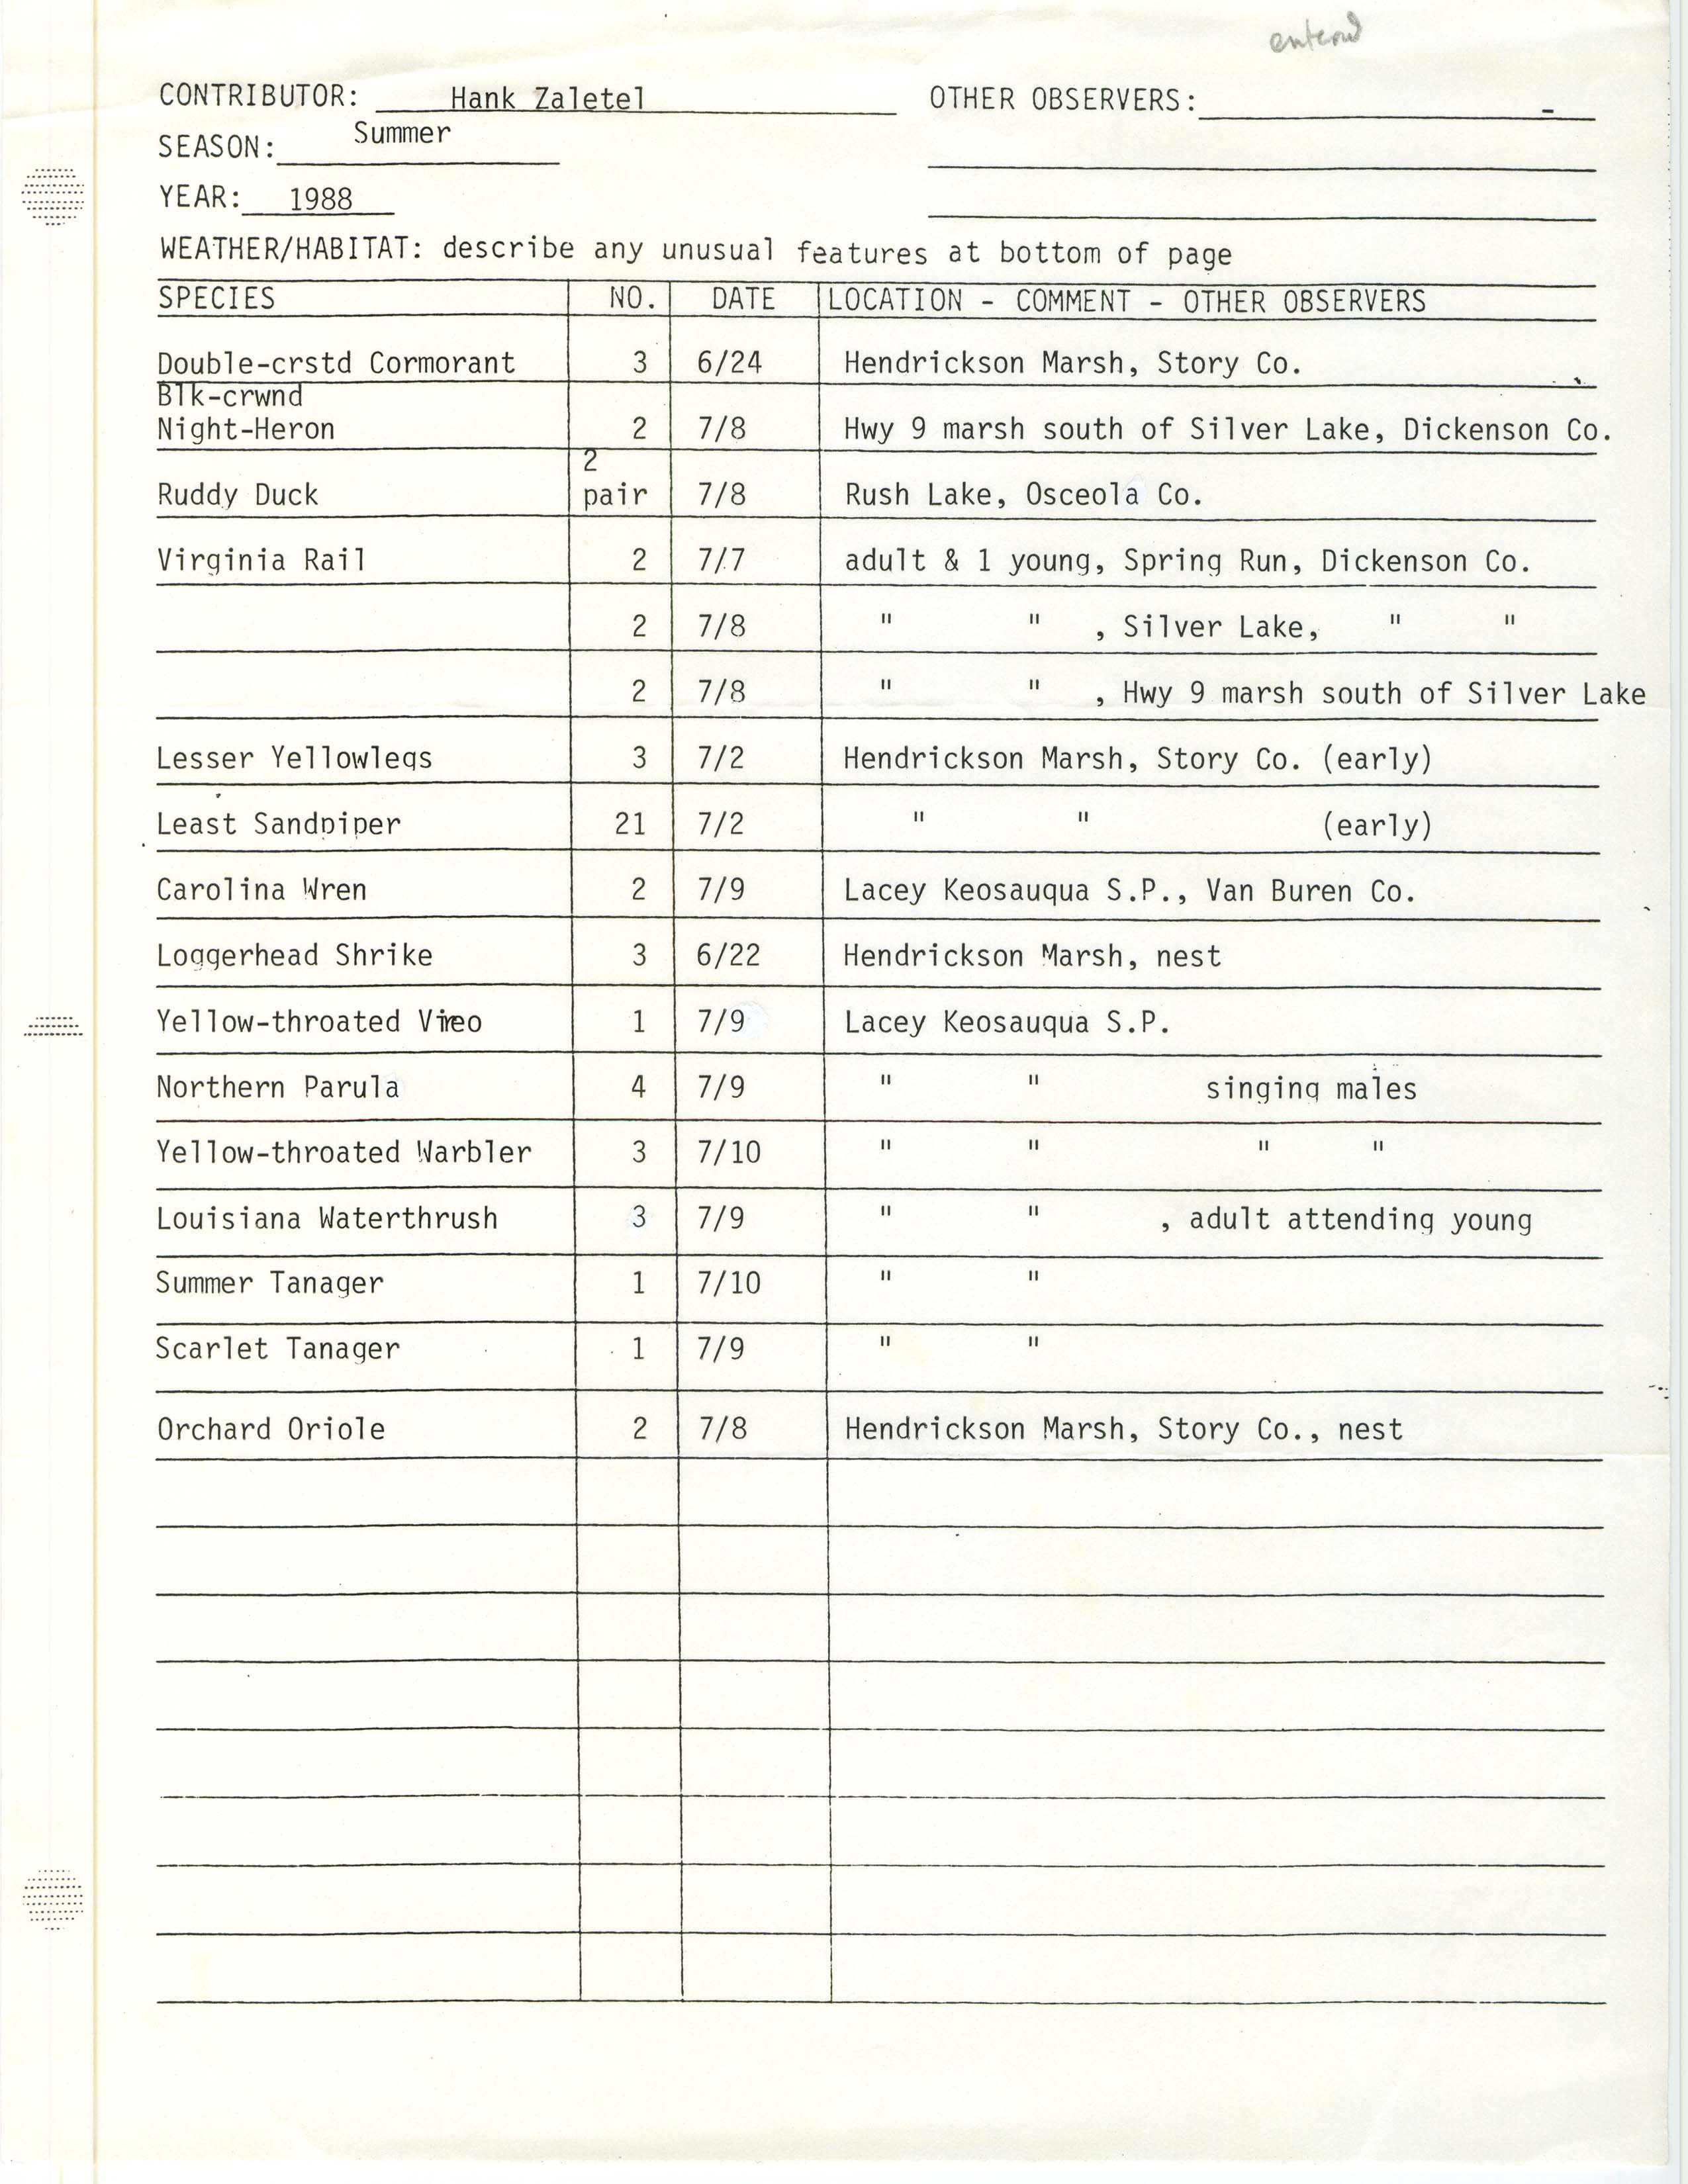 Field notes contributed by Hank Zaletel, summer 1988